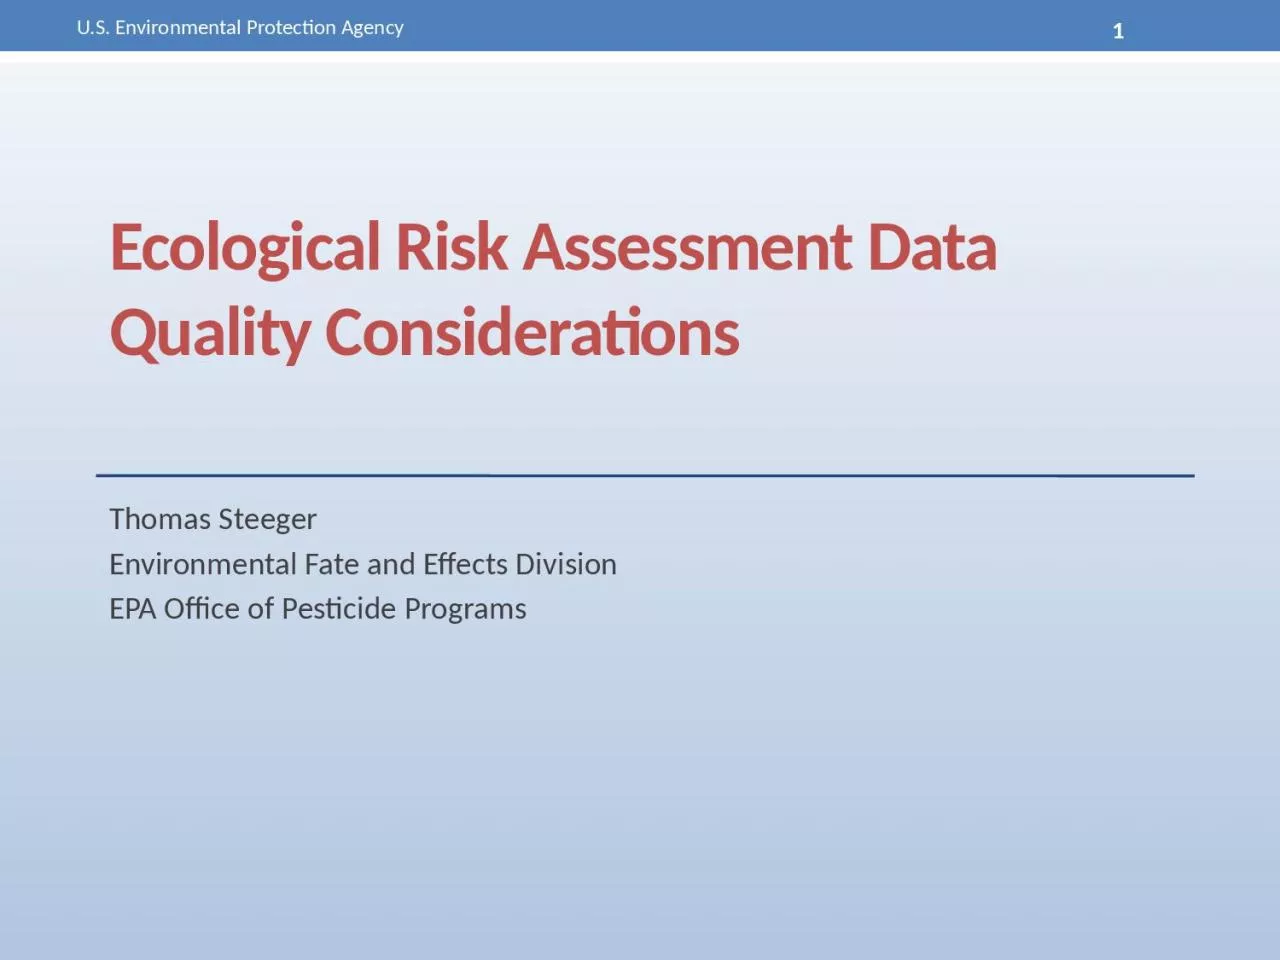 Ecological Risk Assessment Data Quality Considerations